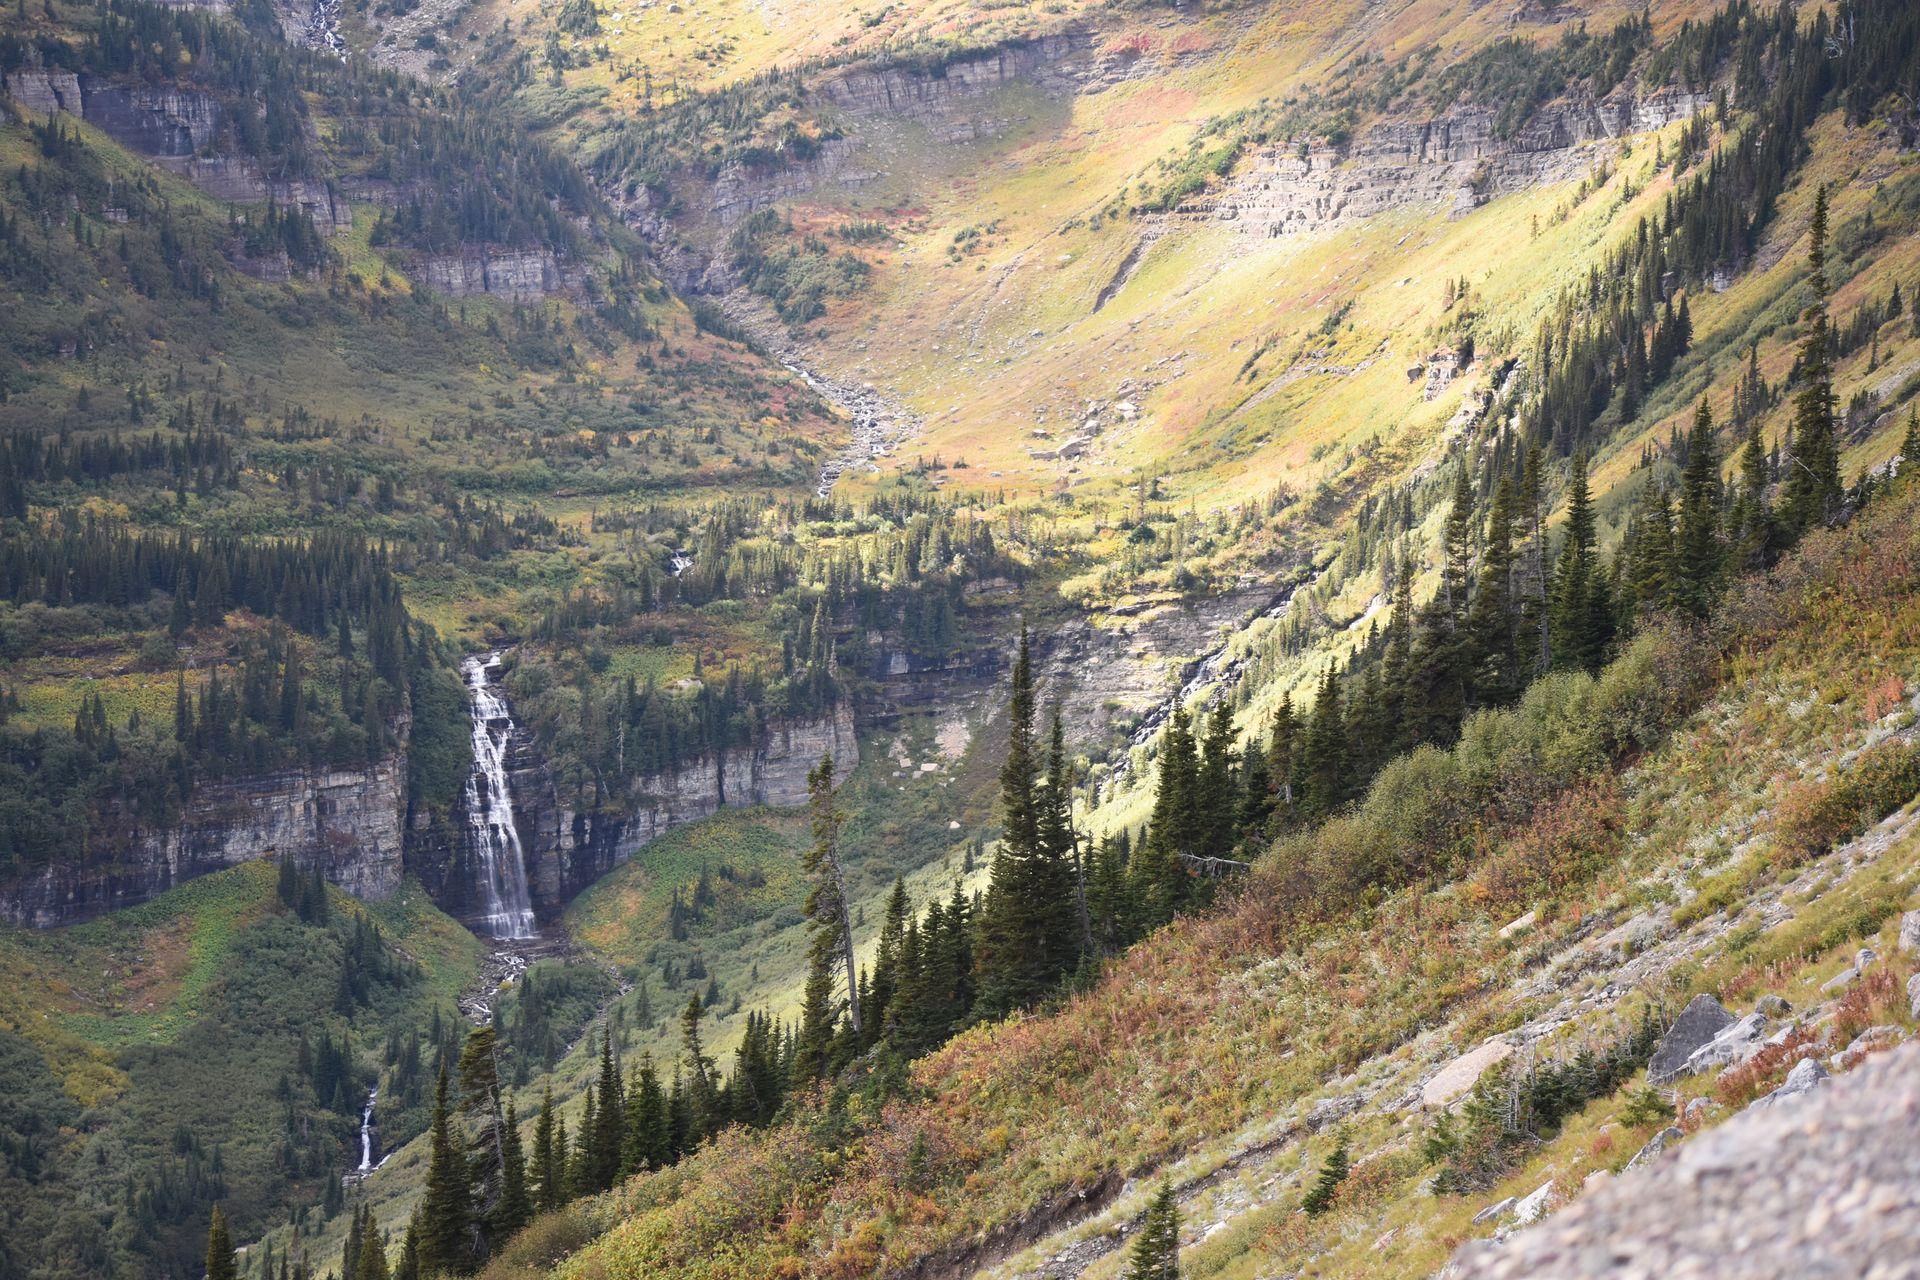 A view of a valley with a waterfall cascading down a cliff. It is a view from the Going-to-the-Sun Road.